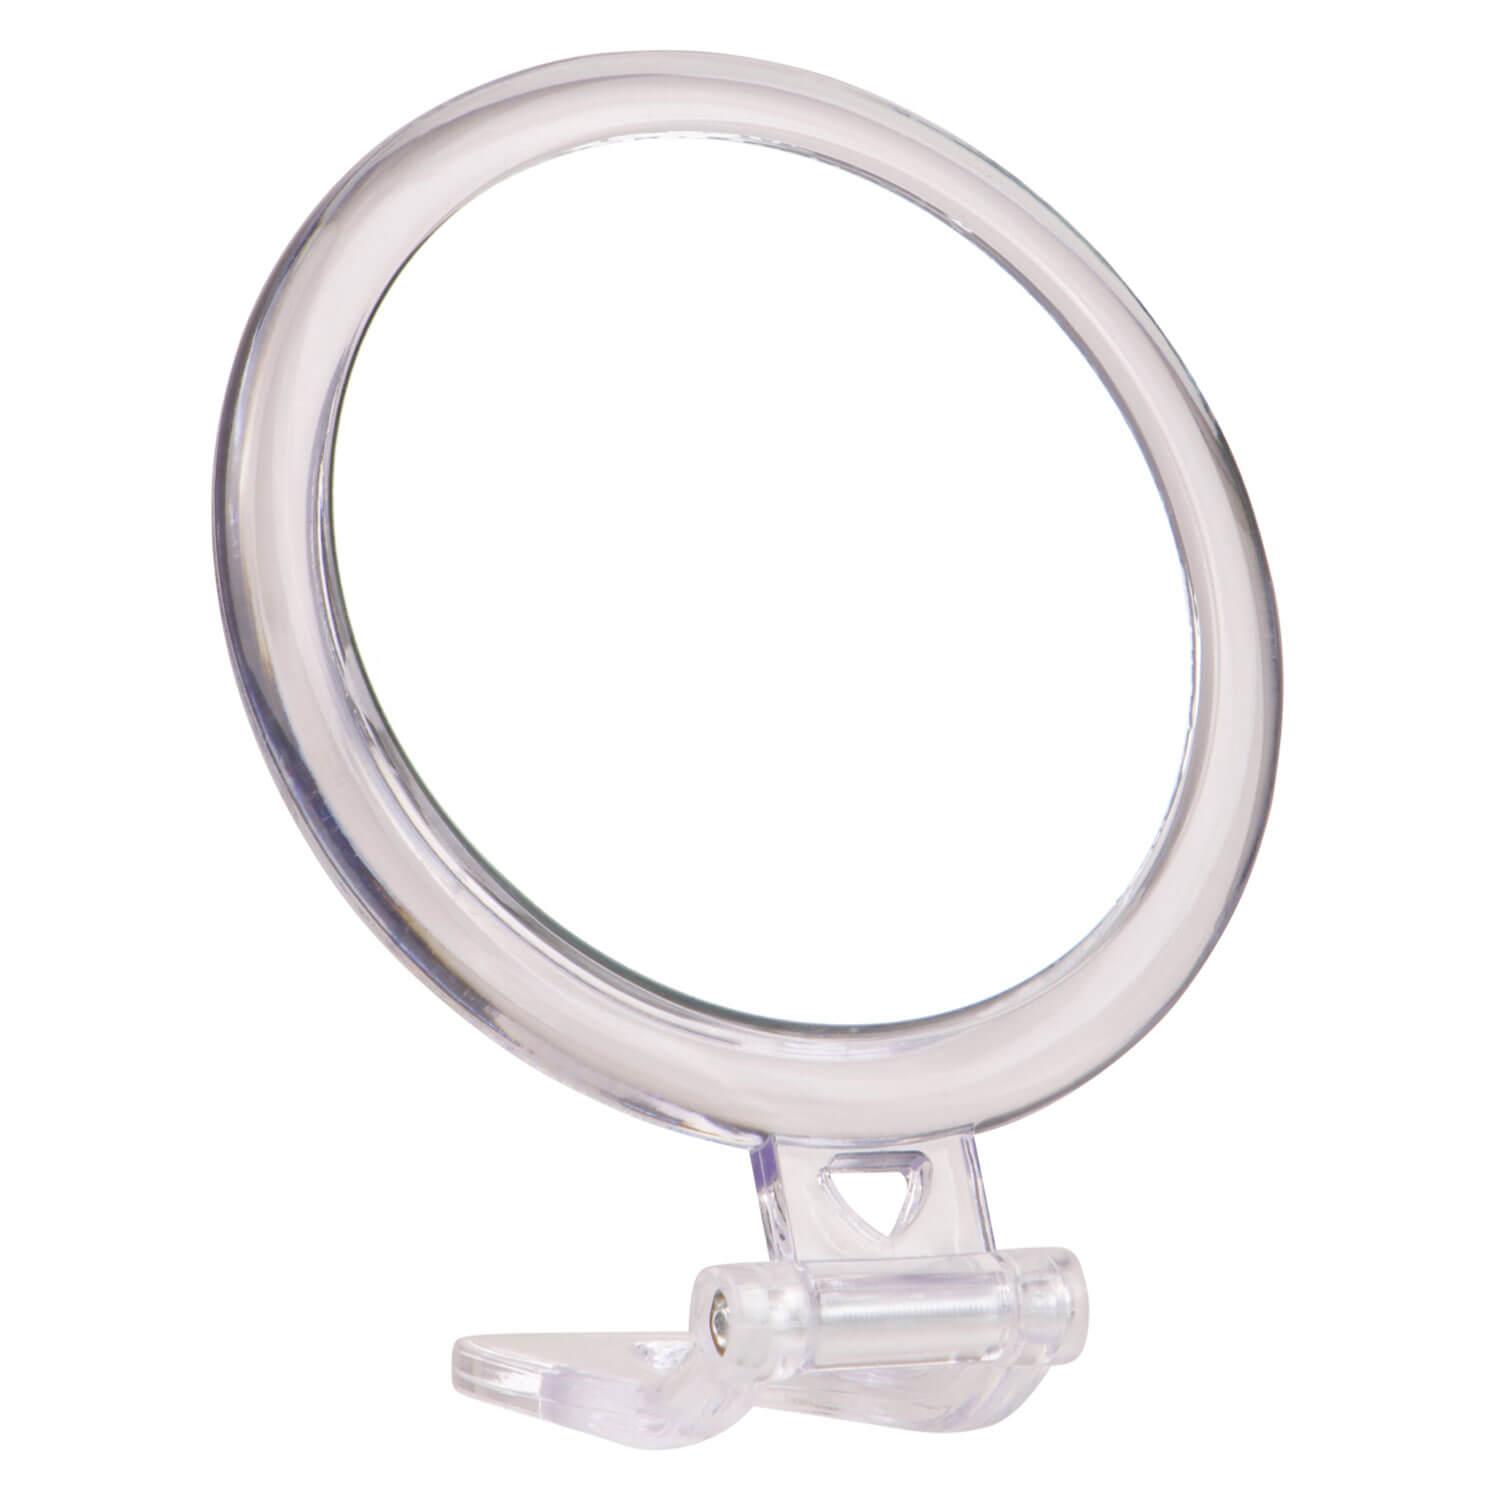 TRISA Beauty - Adjustable Mirror Round x1 and x5